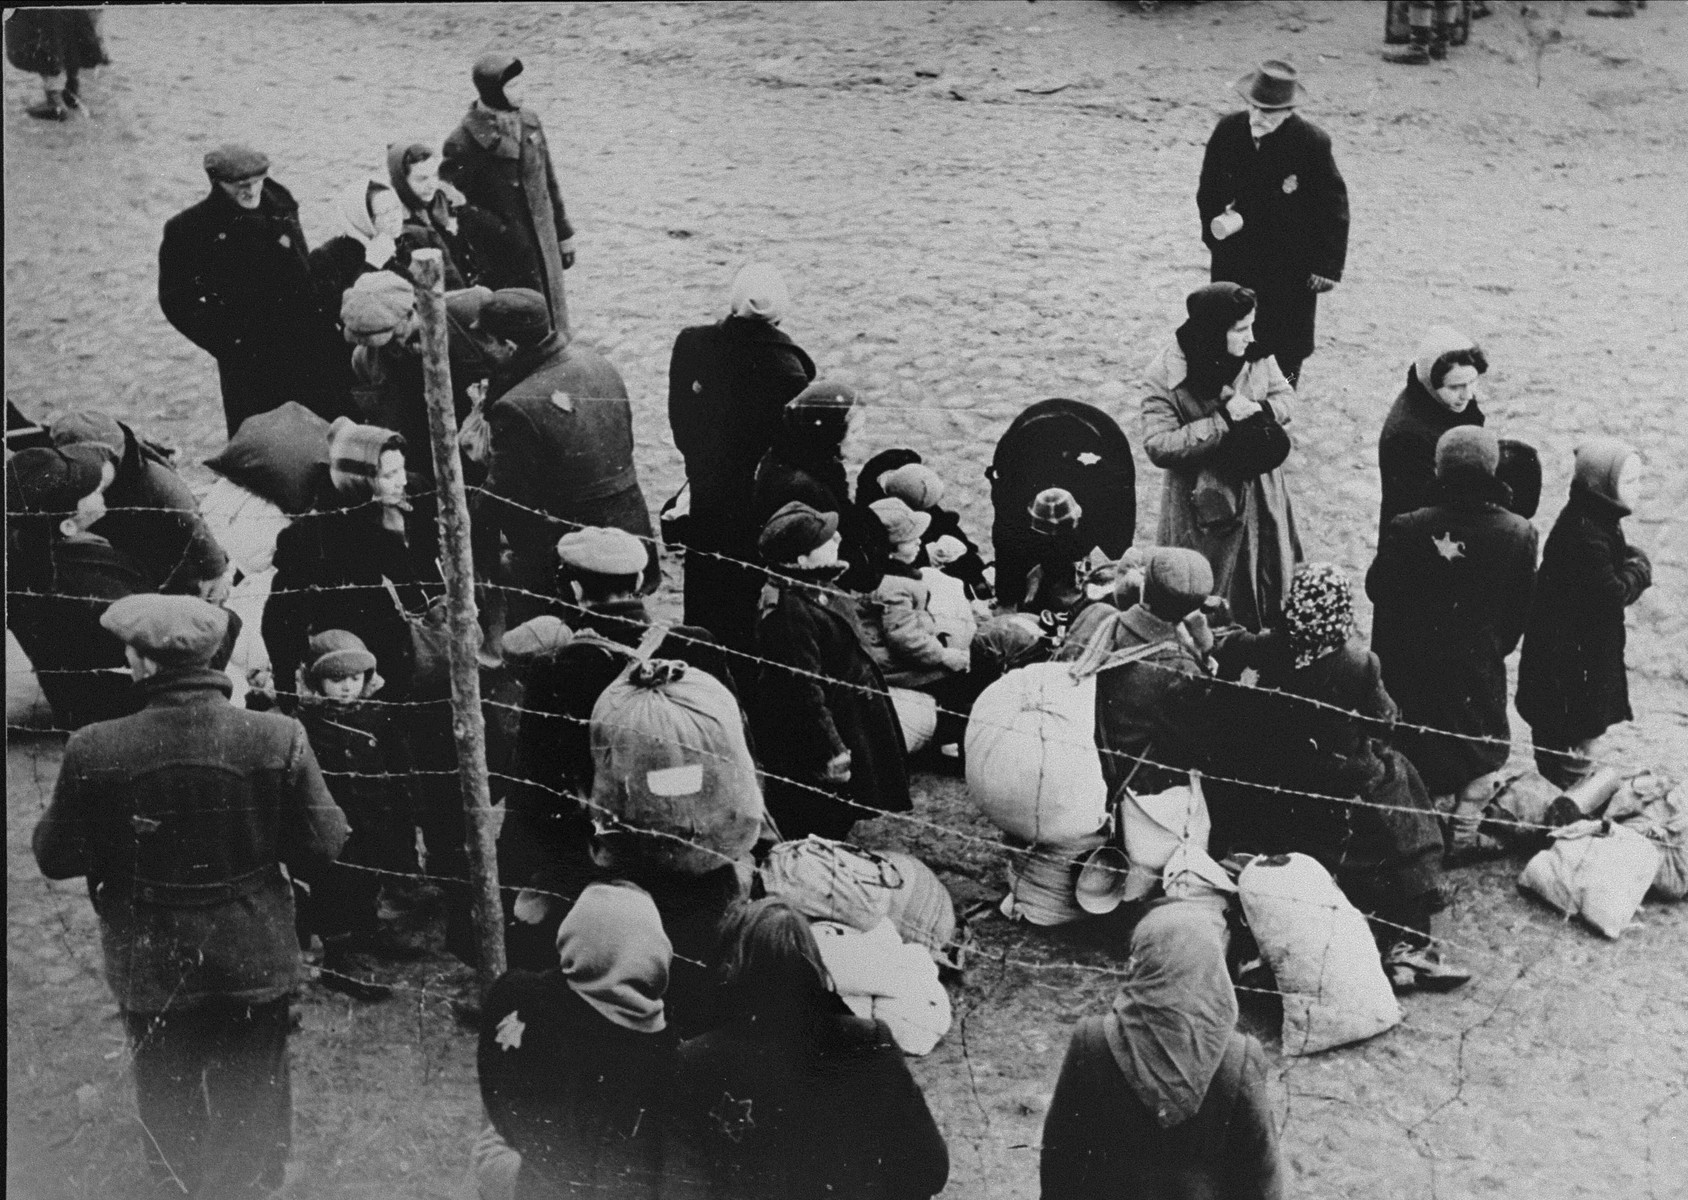 A group of Jews is gathered at an assembly point in the Kovno ghetto during a deportation action. 

[Though the photo seems to be part of the series of the deportation to Estonia, the family has been identified as the Ipp family who were sent to Riga.  Among those pictured may be Jacob Ipp (now Ipson, the boy standing on the left, behind the barbed wire fence), his mother, Etta (Butrimowitz) Ipp (standing behind him), and Chananya Butrimowitz (Etta's father, carrying a backpack).]